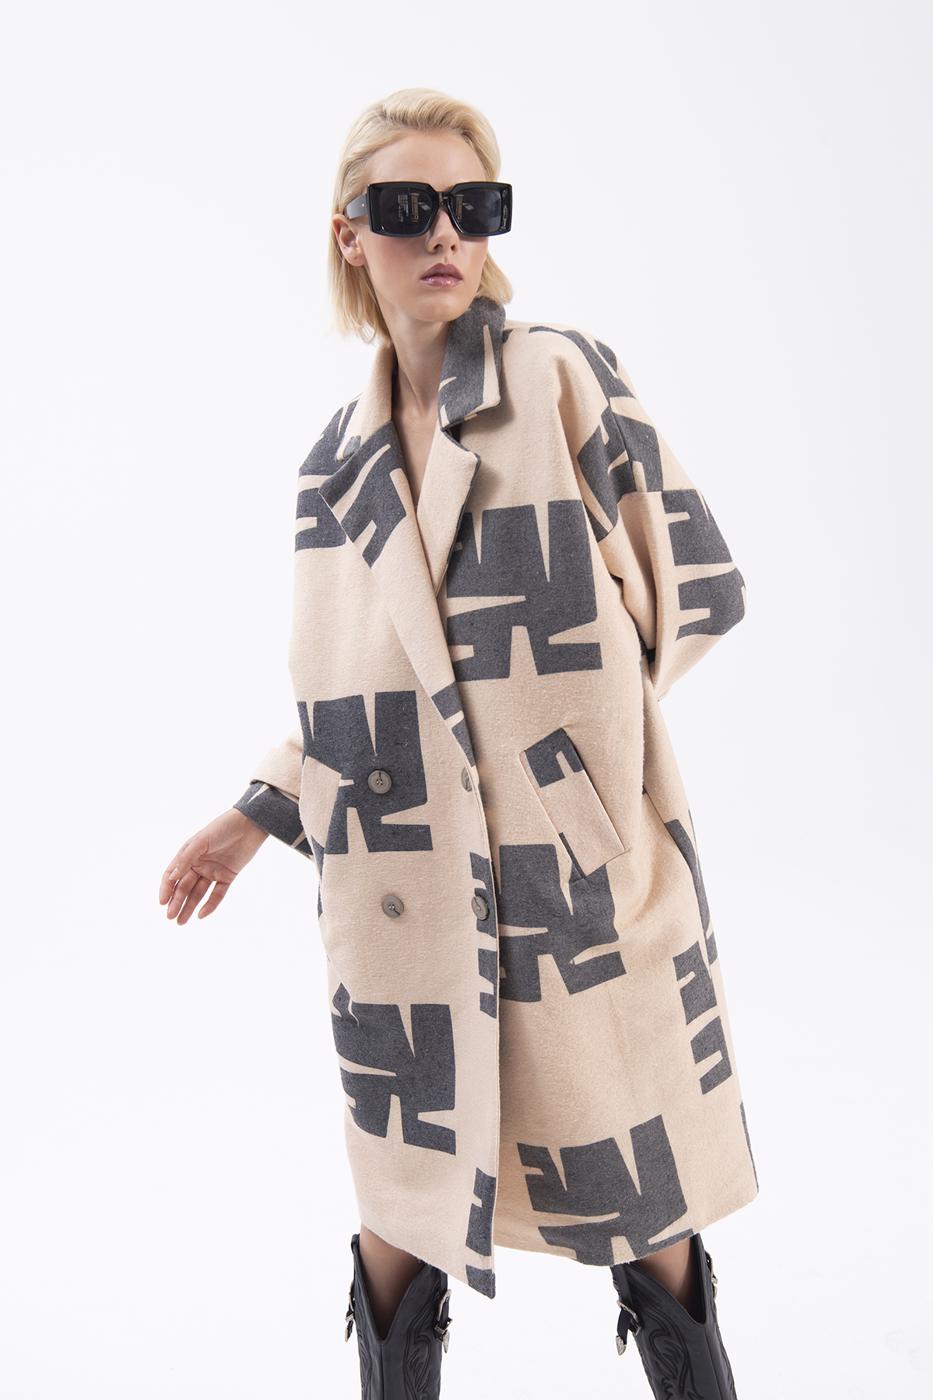 A wholesale clothing model wears Jacket Collar Patterned Coat, Turkish wholesale Coat of BSL